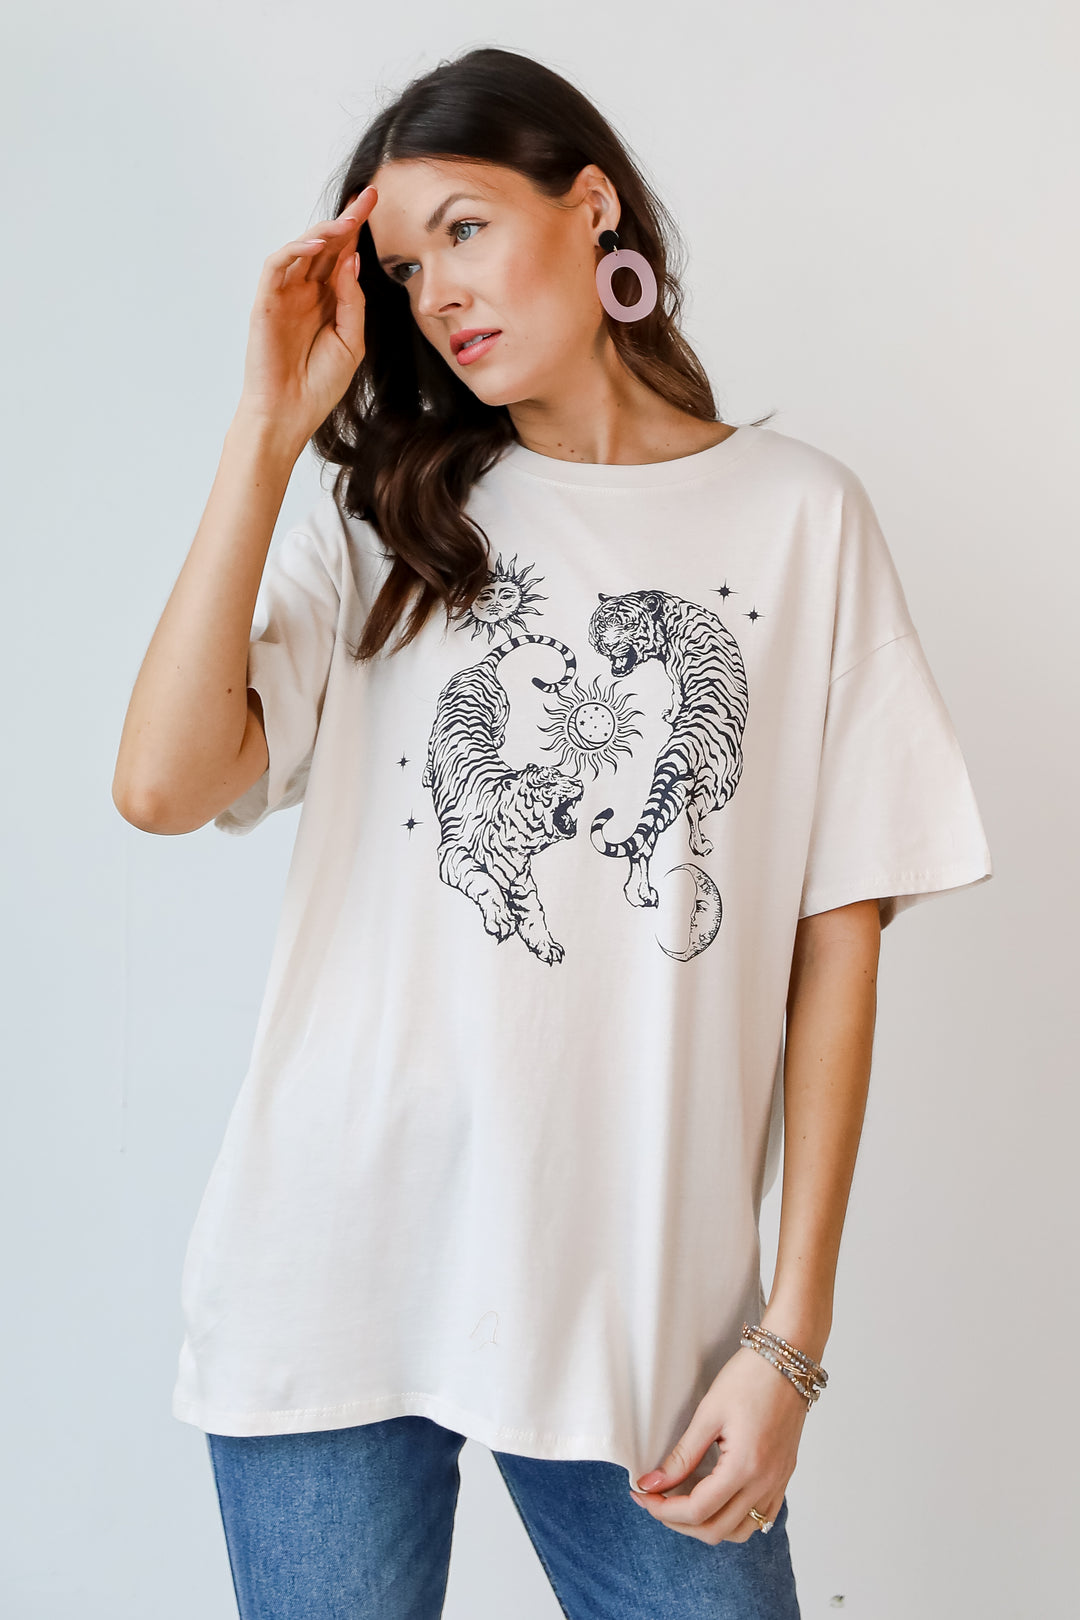 Tiger Graphic Tee on model